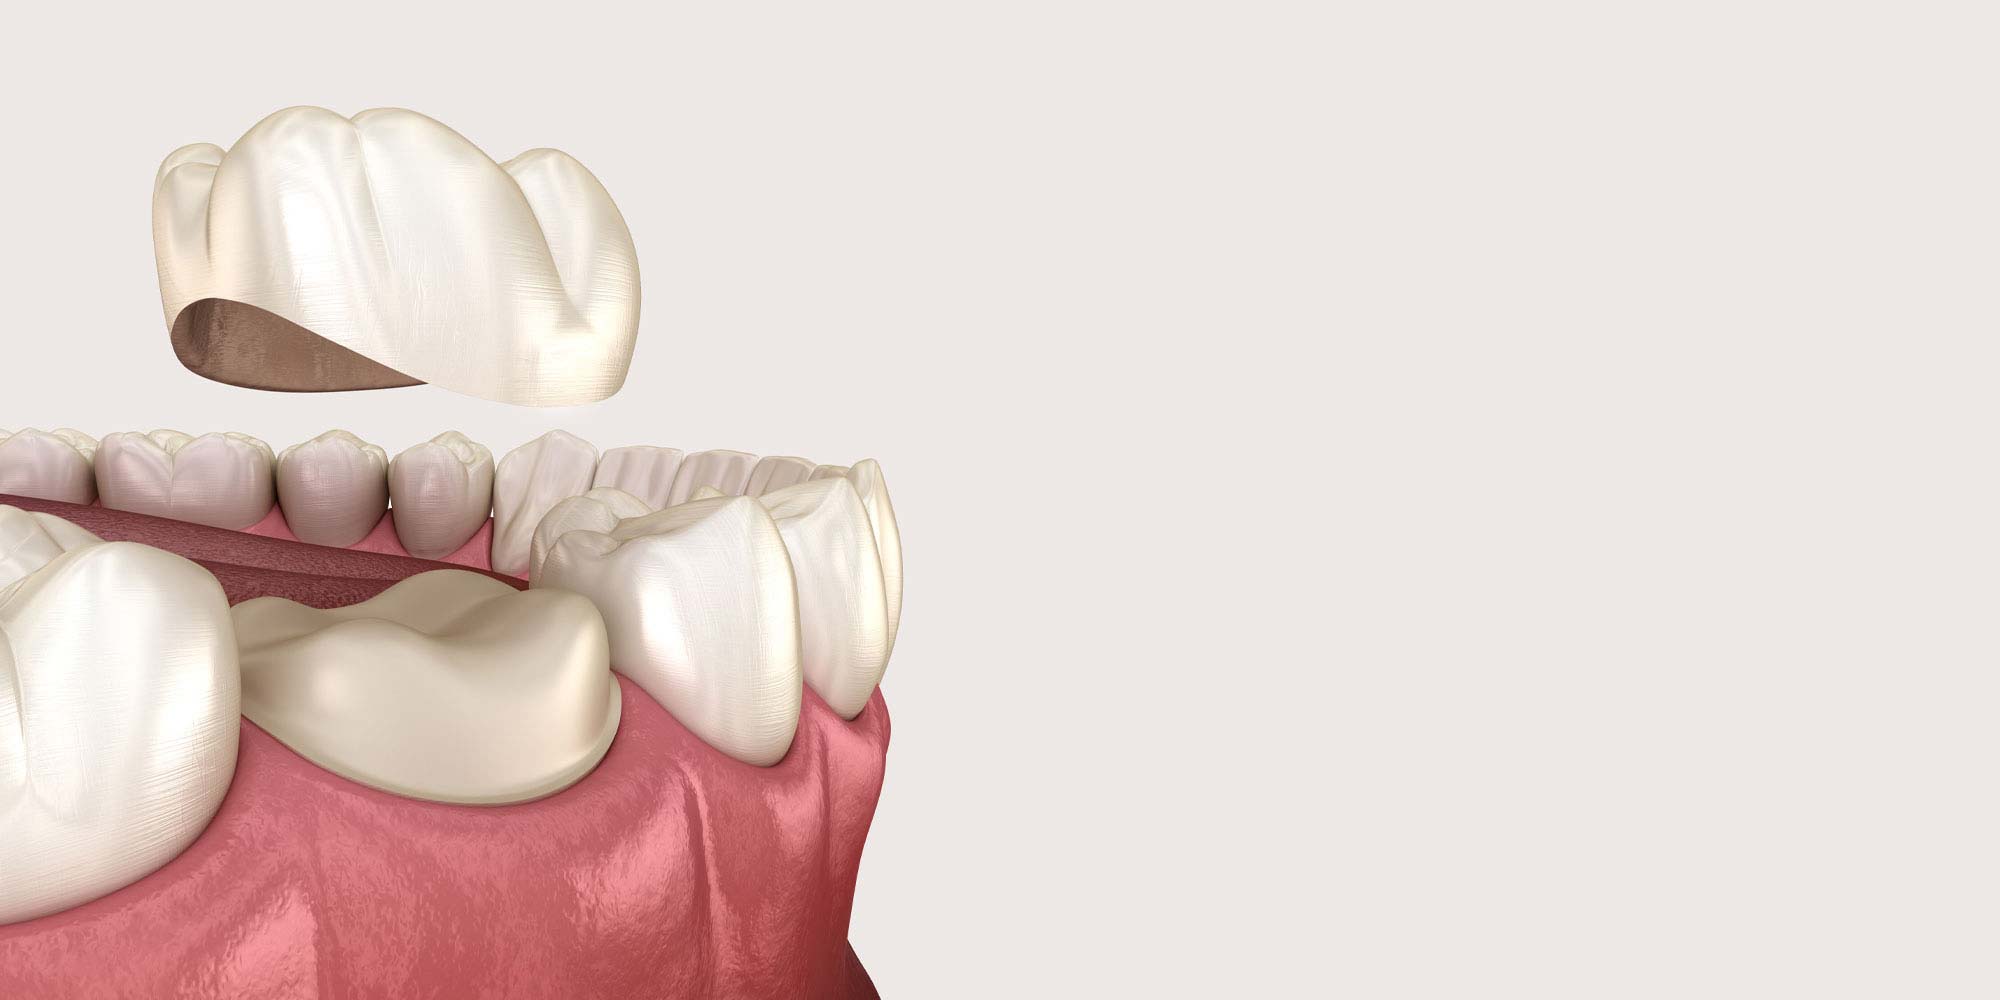 a model of a dental crown being placed on a tooth